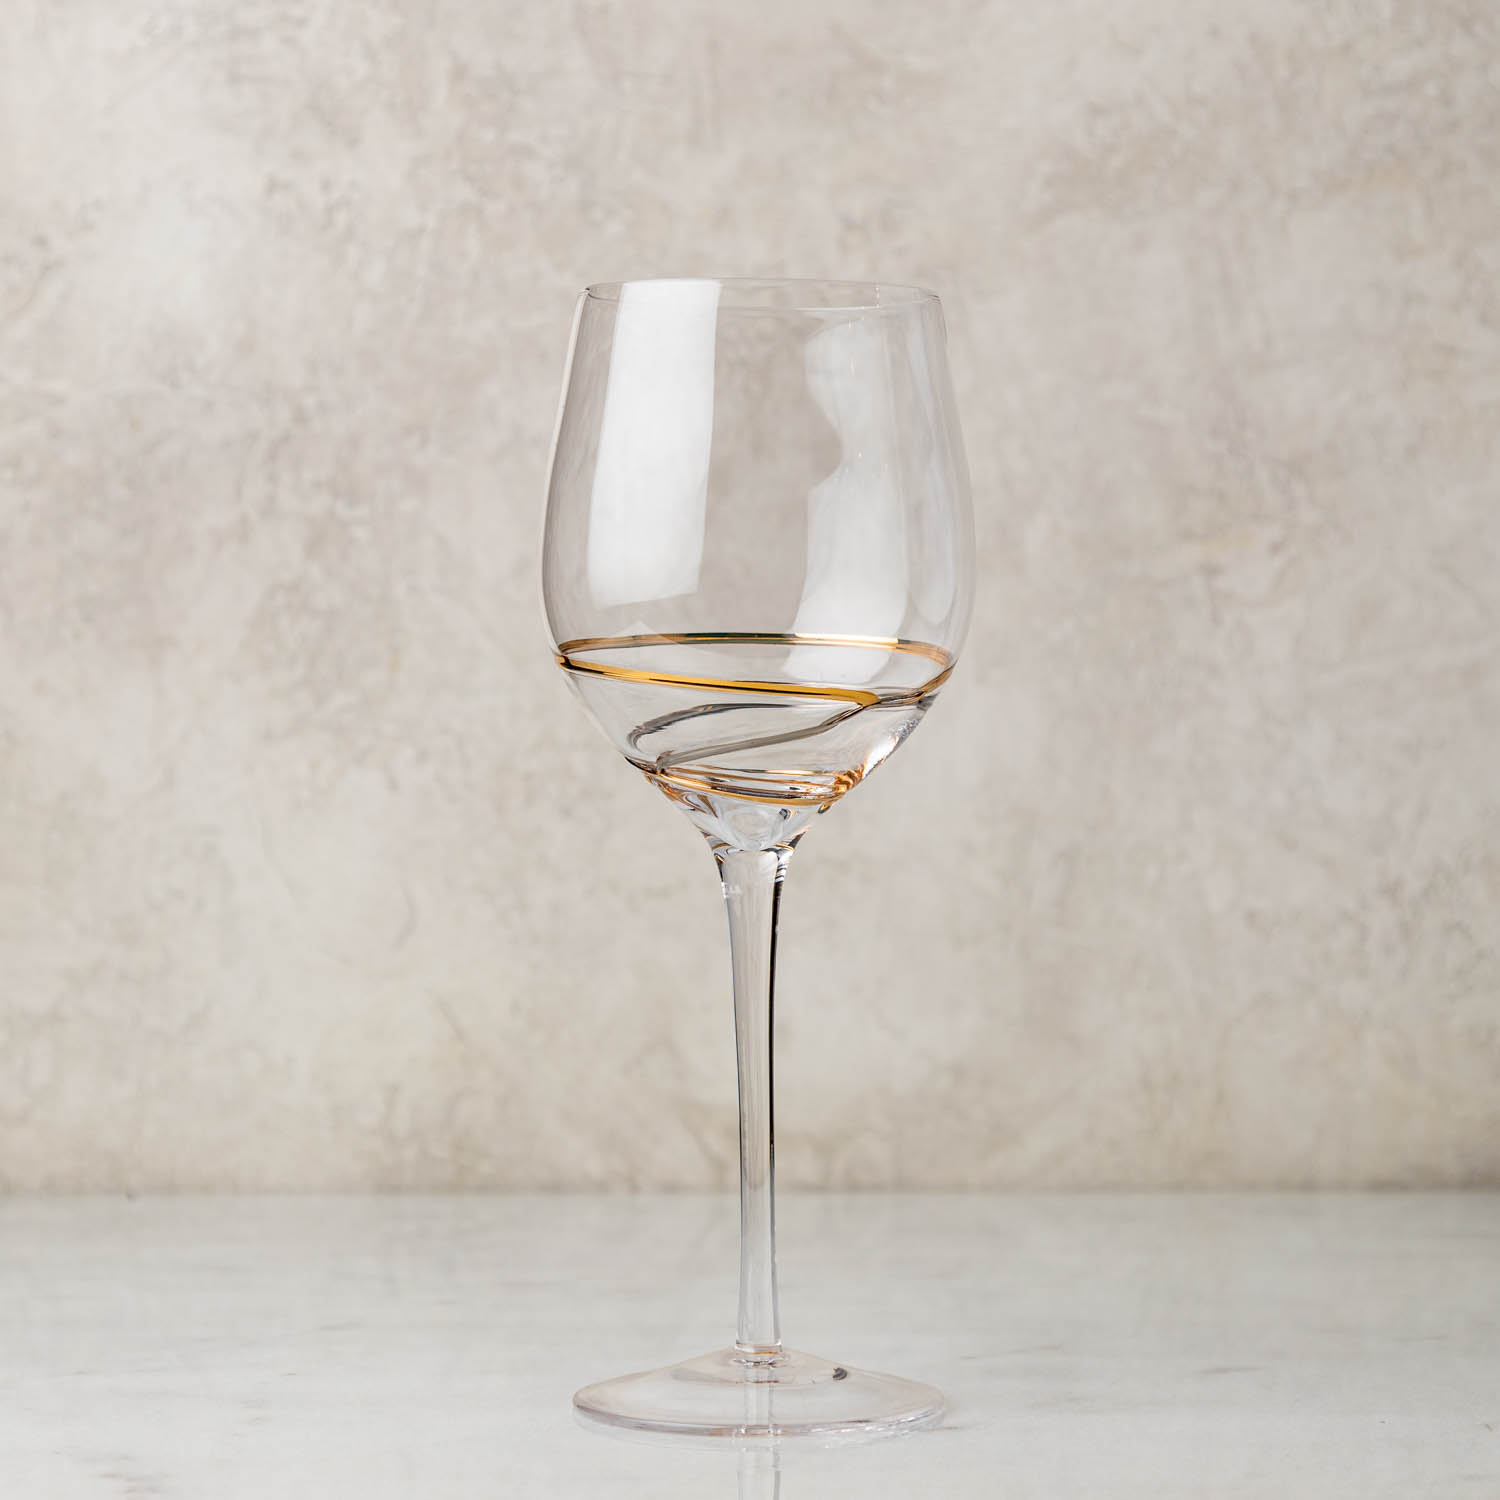 https://shop.coopershawkwinery.com/images/product/P/Swirl%2017oz%20Glass%20Stemmed%20II.jpg